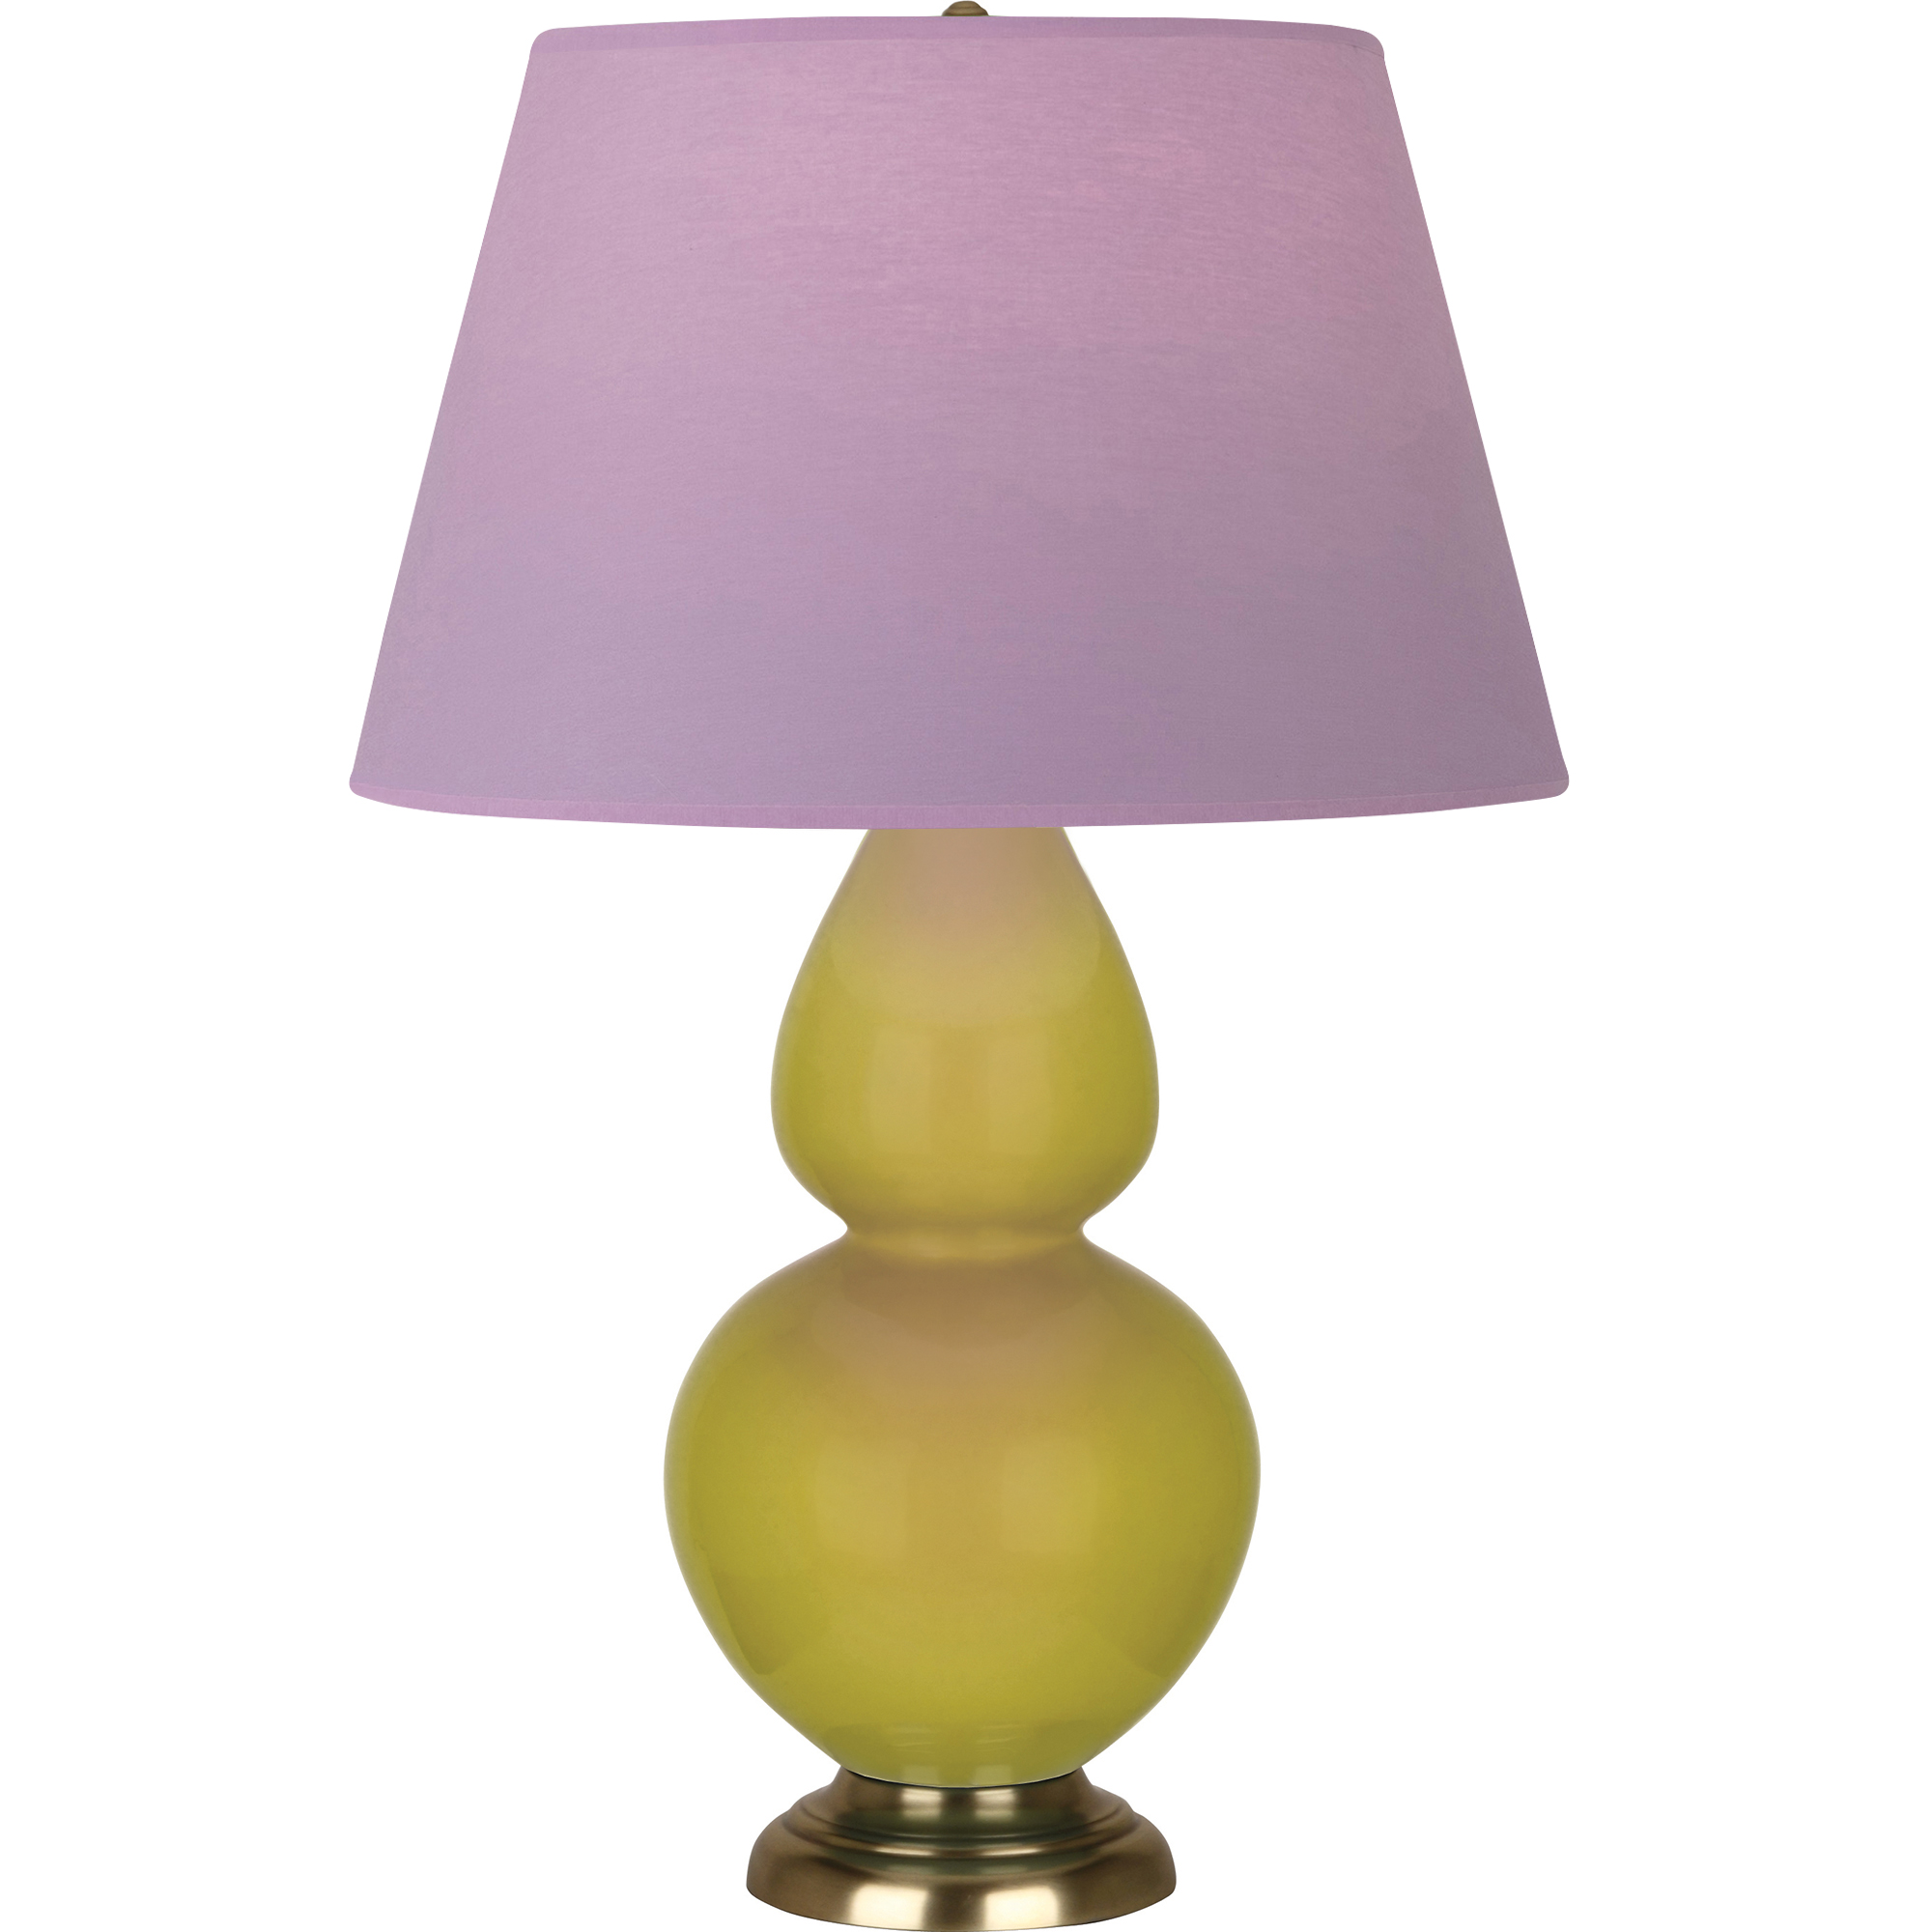 Double Gourd Table Lamp Style #CI20L